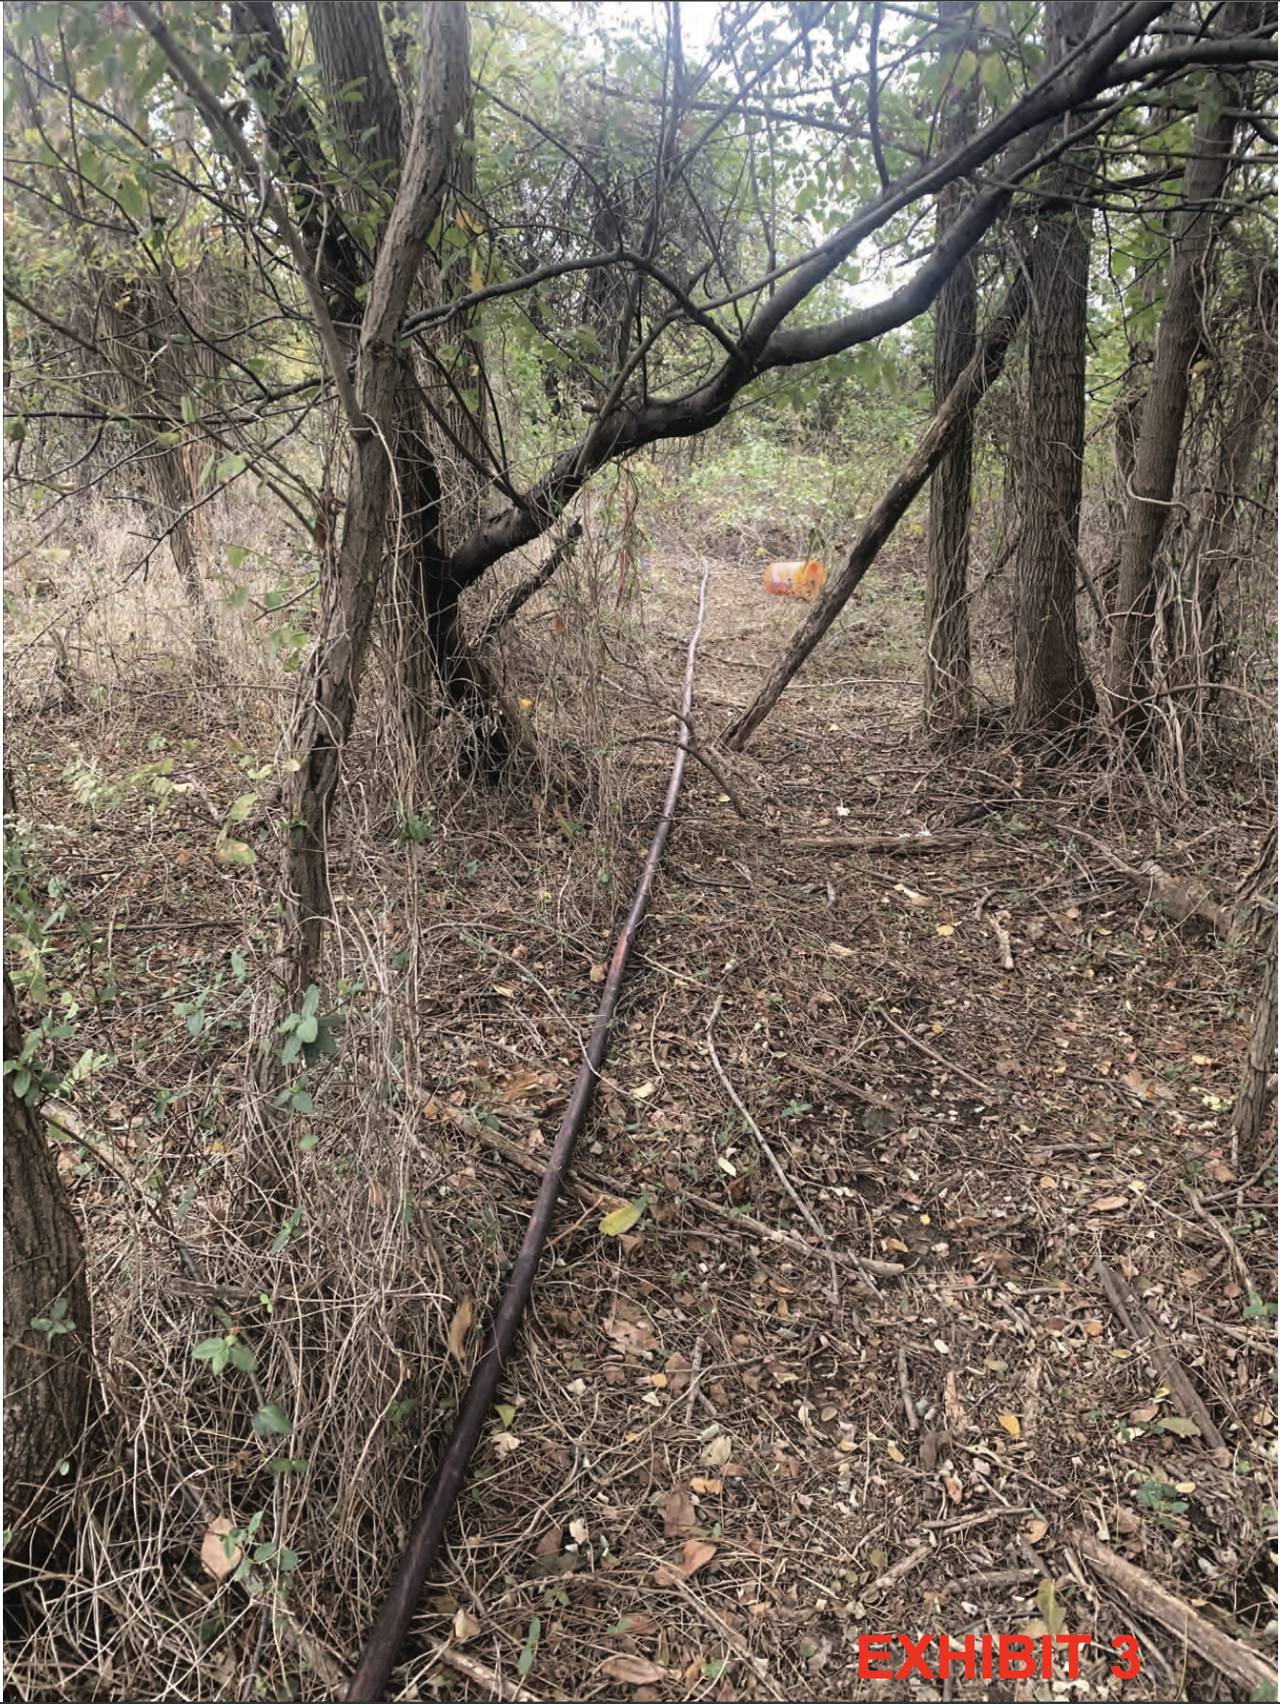 State investigators found that Curtis Bay Energy was discharging wastewater onto an adjacent property via an unpermitted hose that ran through the woods to the property fence line.